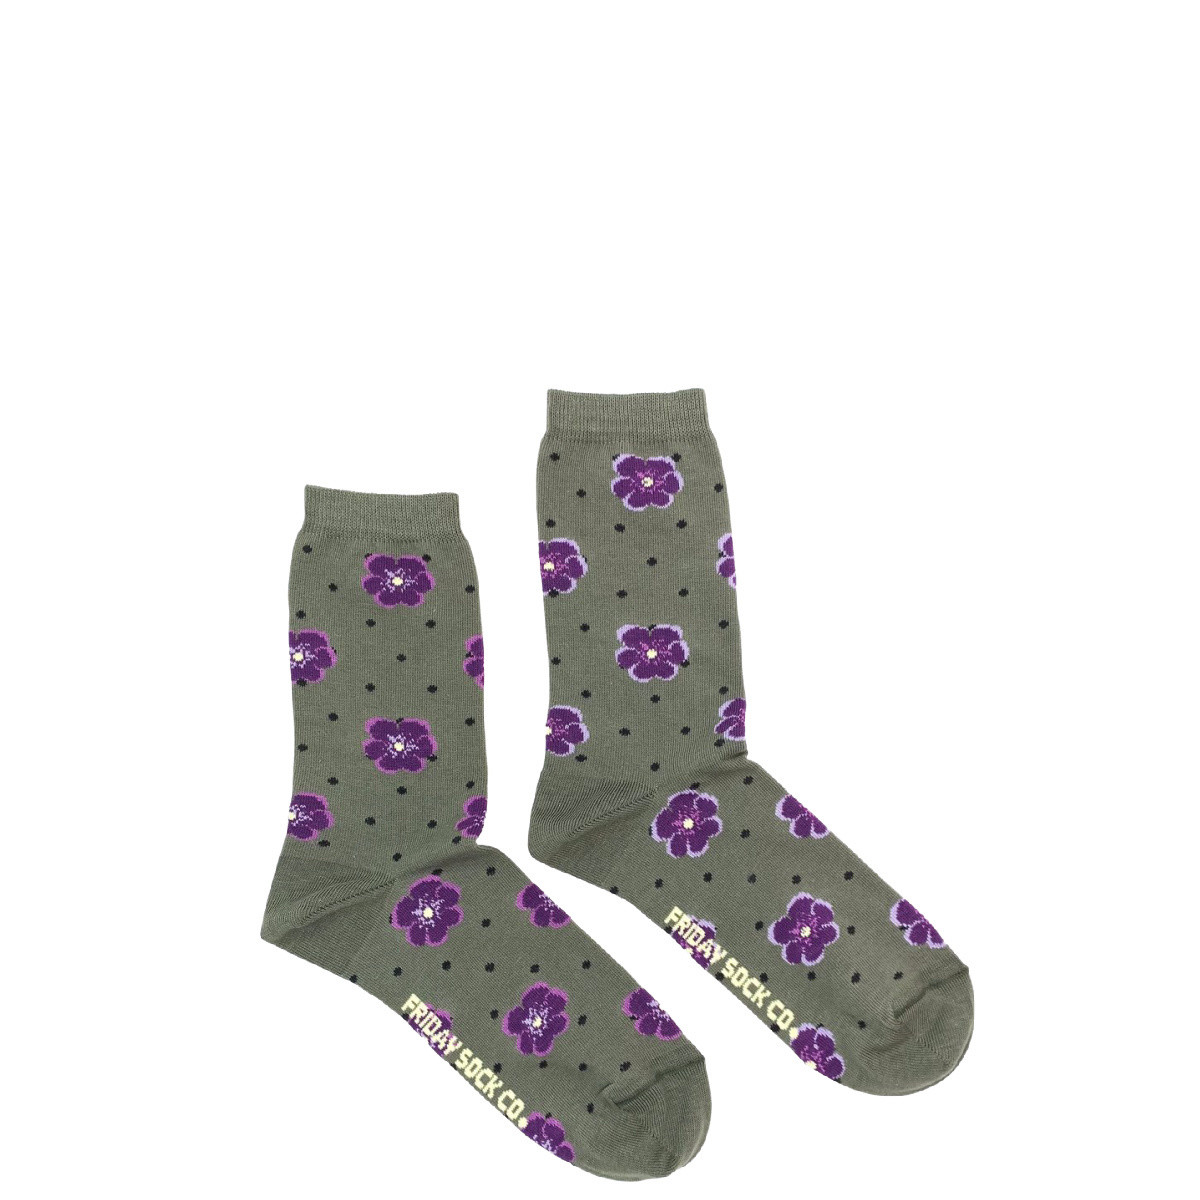 Friday Sock Co. Women's Floral Pansy Socks W 5 - 10 (M 4 - 8)